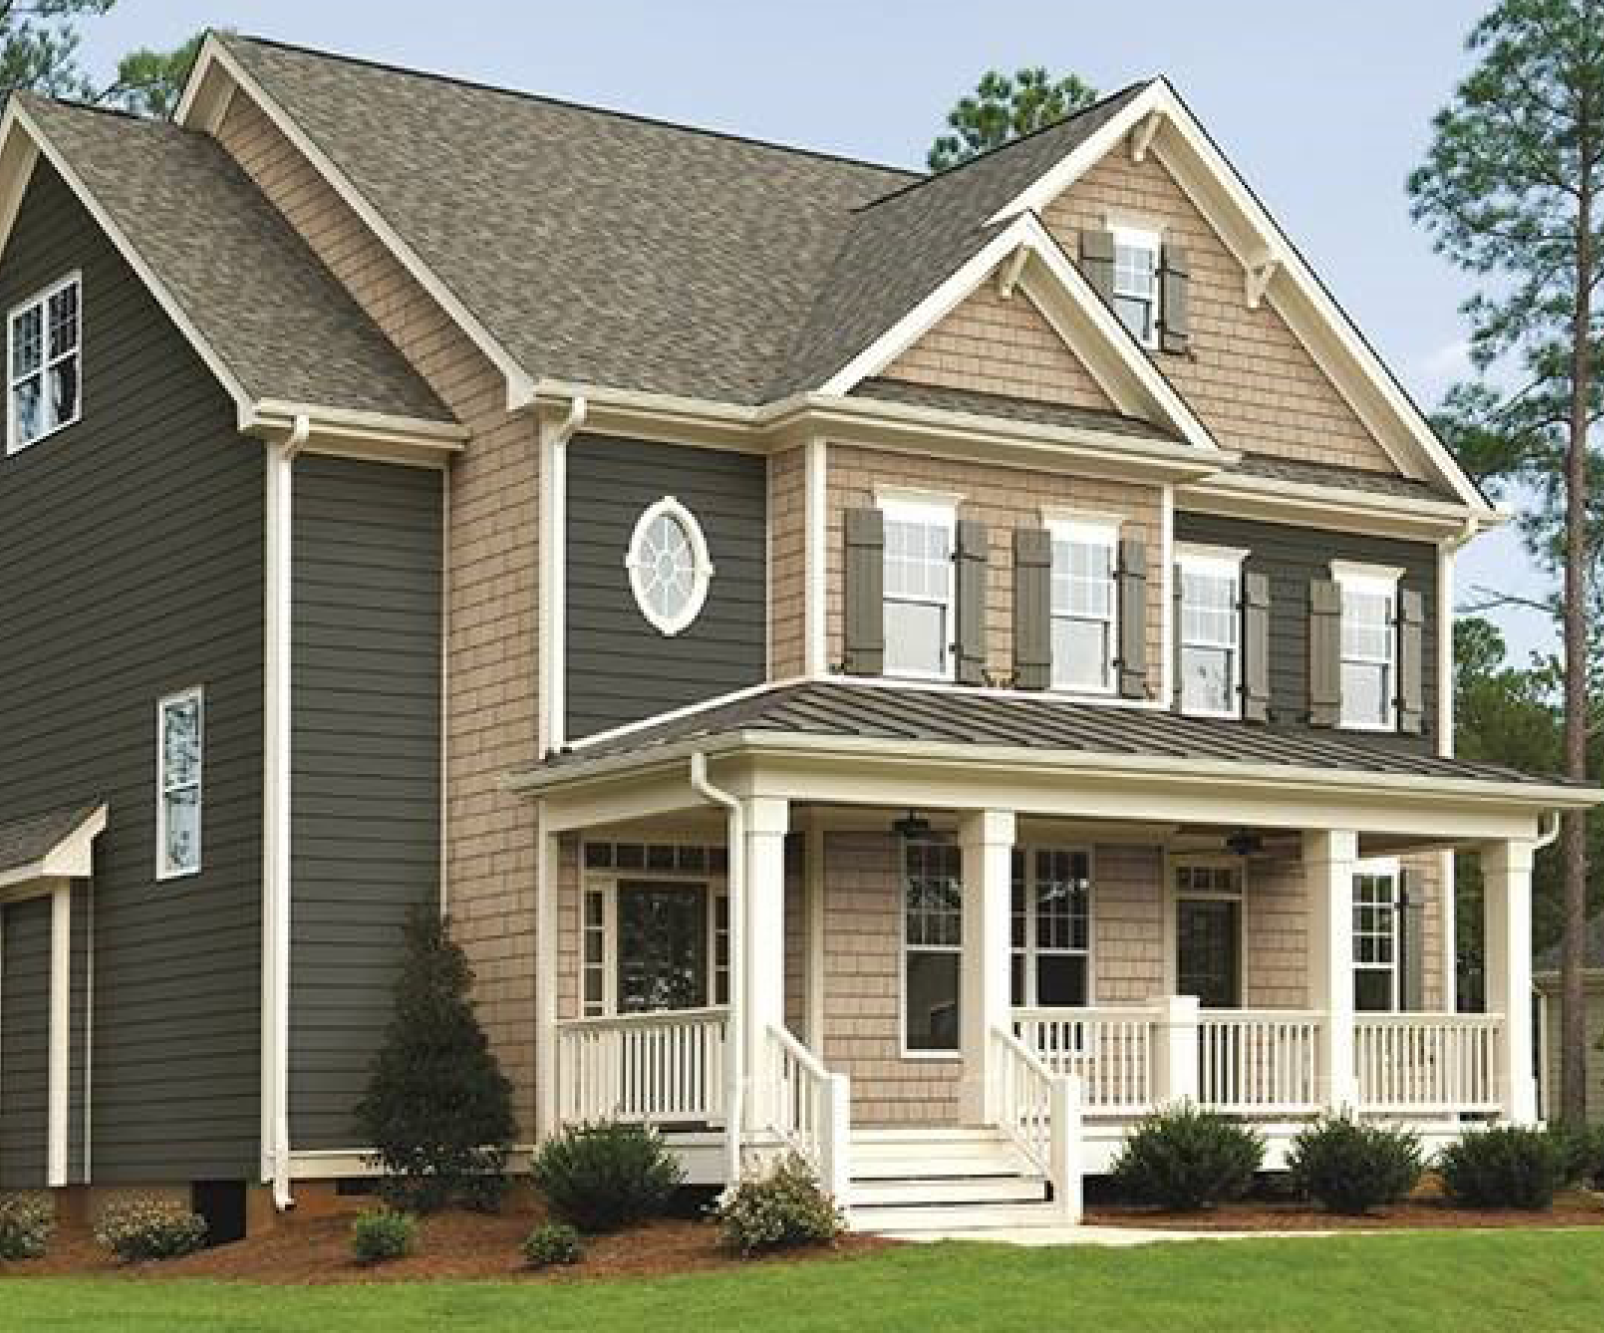 7 Exterior Trim Trends that Add Value to Your Home